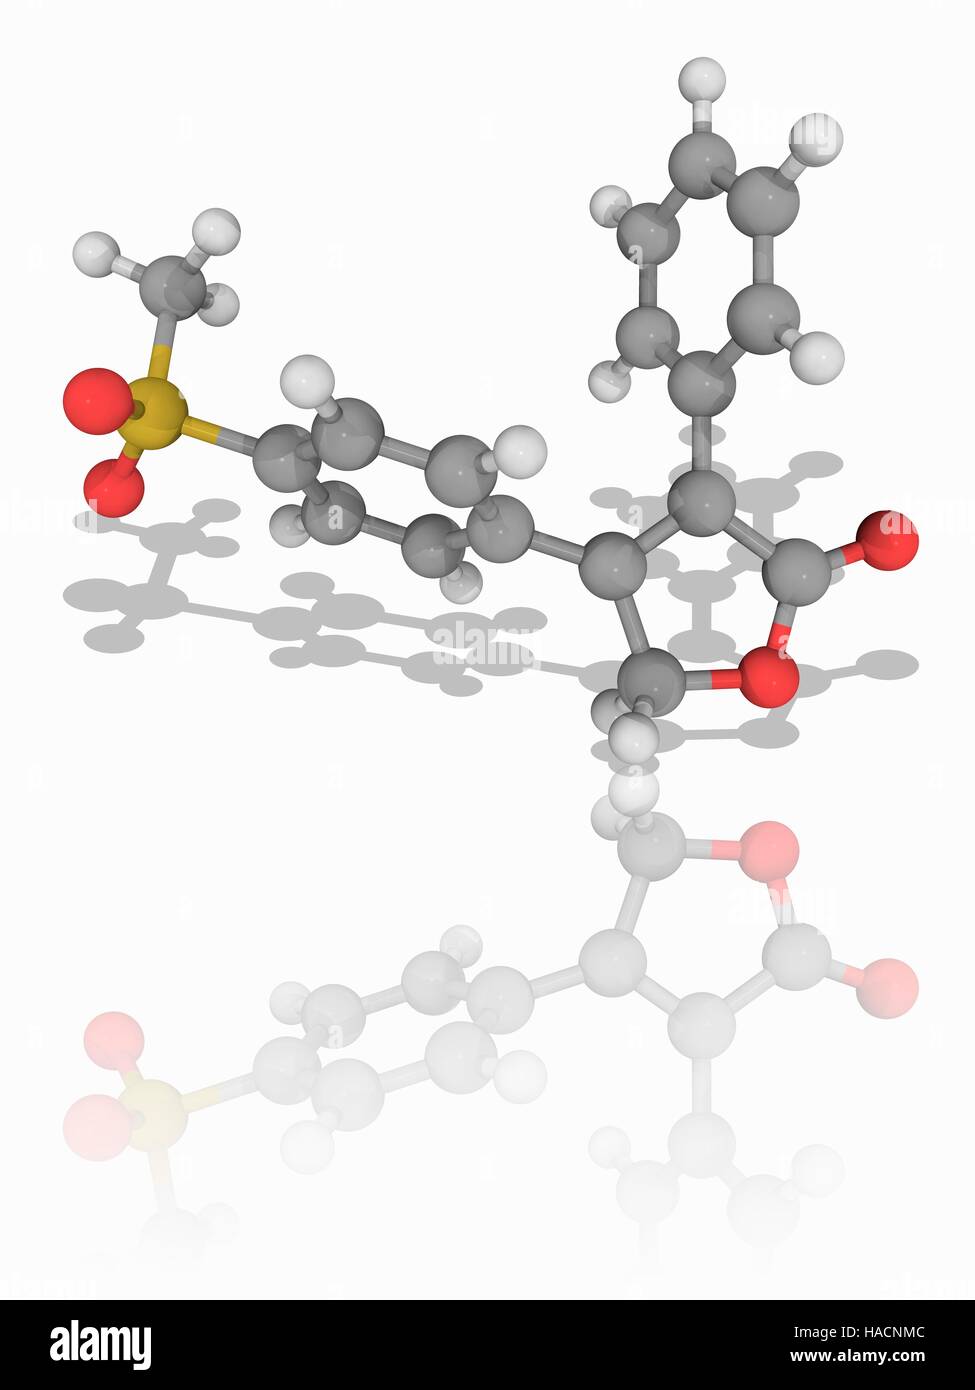 Rofecoxib. Molecular model of the drug rofecoxib (C17.H14.O4.S), a non-steroidal anti-inflammatory drug withdrawn over safety concerns. Atoms are represented as spheres and are colour-coded: carbon (grey), hydrogen (white), nitrogen (blue), oxygen (red) and sulphur (yellow). Illustration. Stock Photo